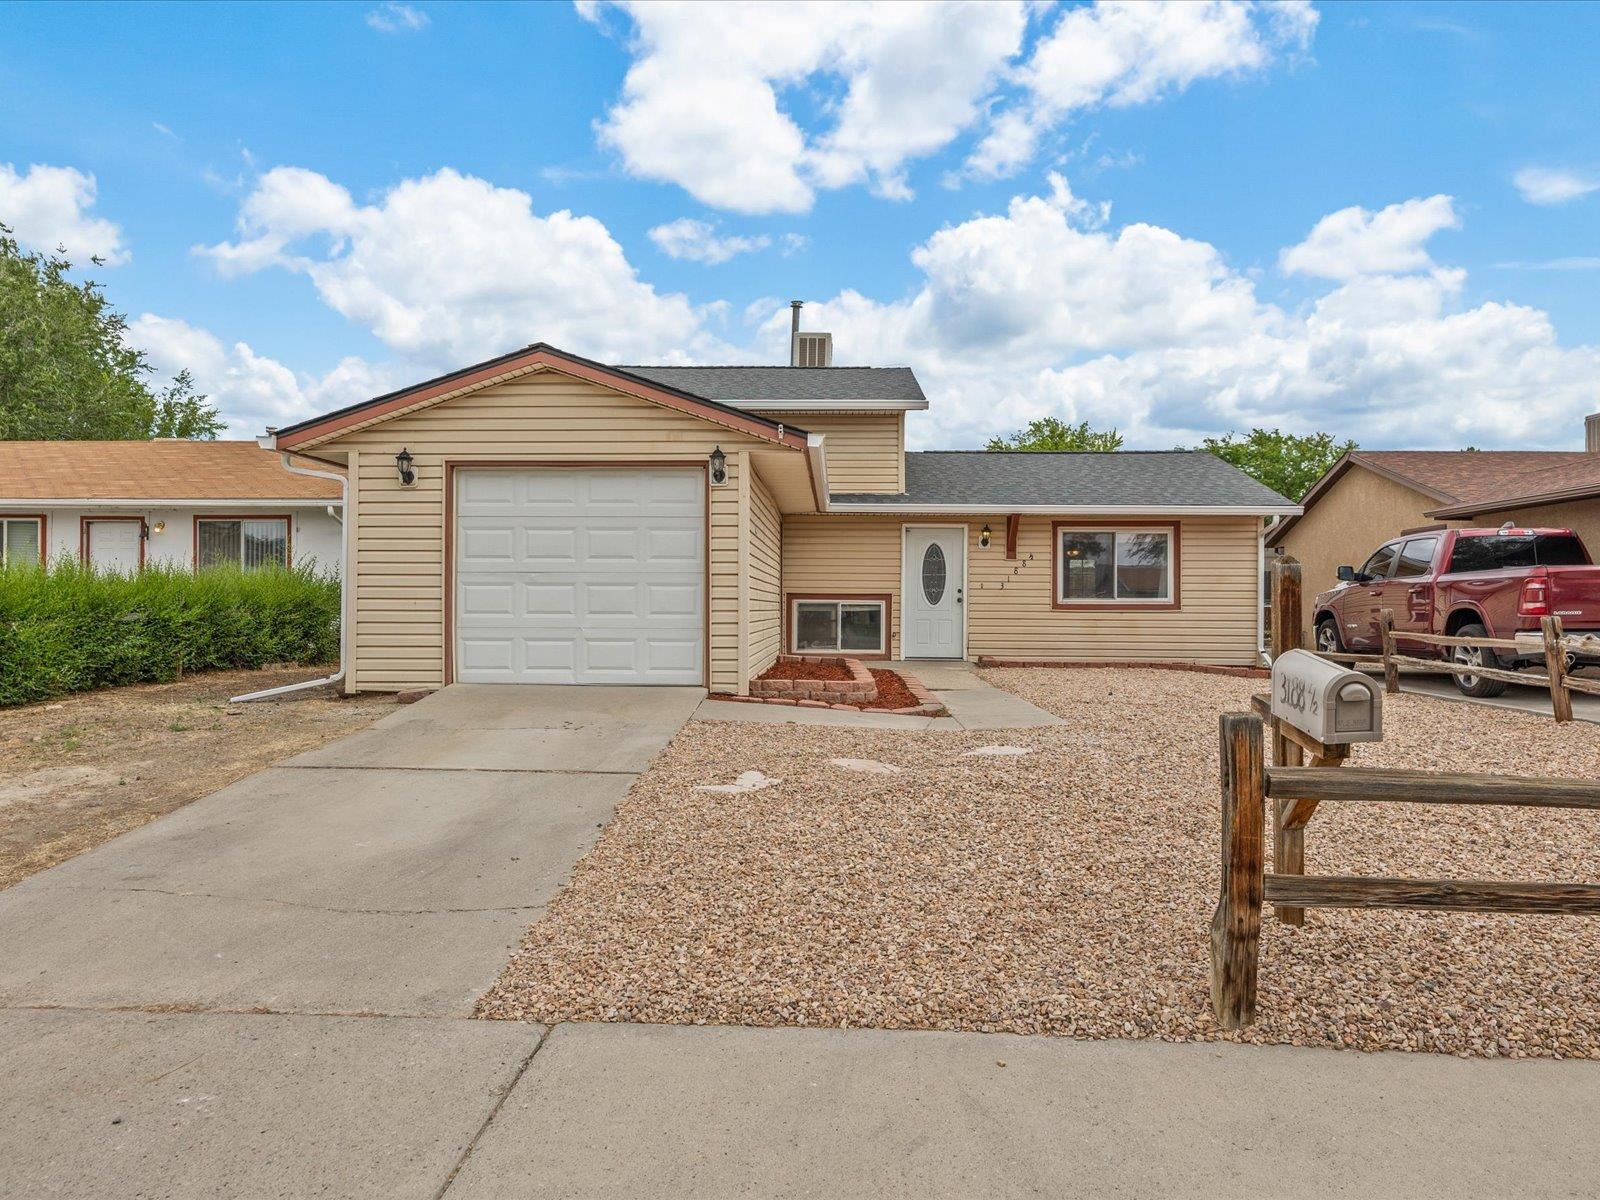 Inviting Tri-Level Home in the NE Grand Junction - Move-In Ready! Featuring 3 bedrooms, 2 bathrooms, 1,188 sq. ft., and a family room, this move-in-ready including brand new LVP flooring, a new roof with a new evaporative cooler, and an attached 1-car garage. Located close to shopping, schools and outdoor recreation, this property offers both convenience and comfort with no HOA fees. Ideal for your first home or as an investment property, don’t miss out on the opportunity -schedule your viewing today!